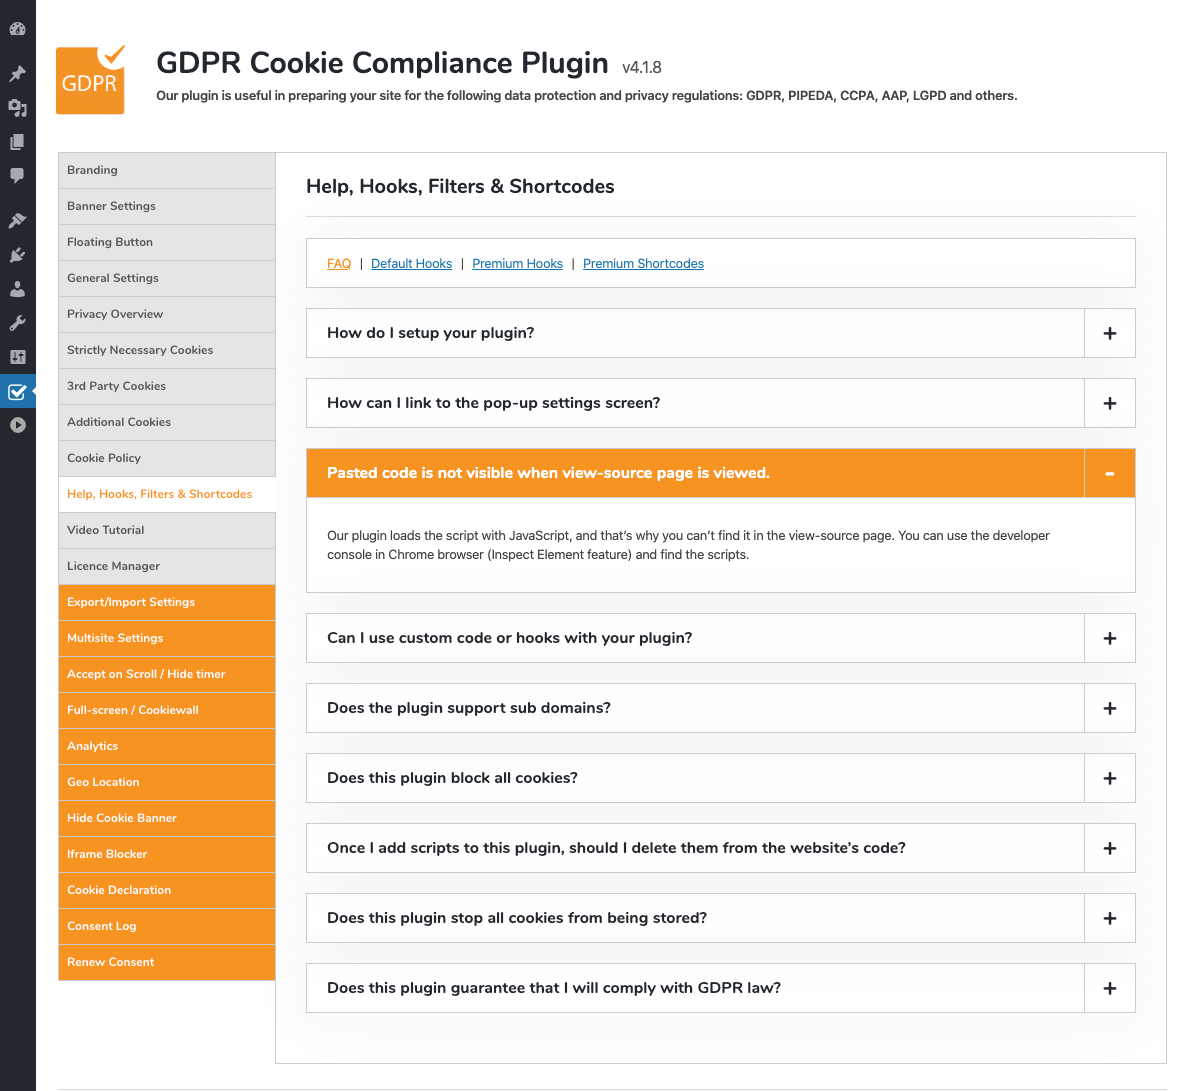 GDPR Cookie Compliance - Admin - General Settings